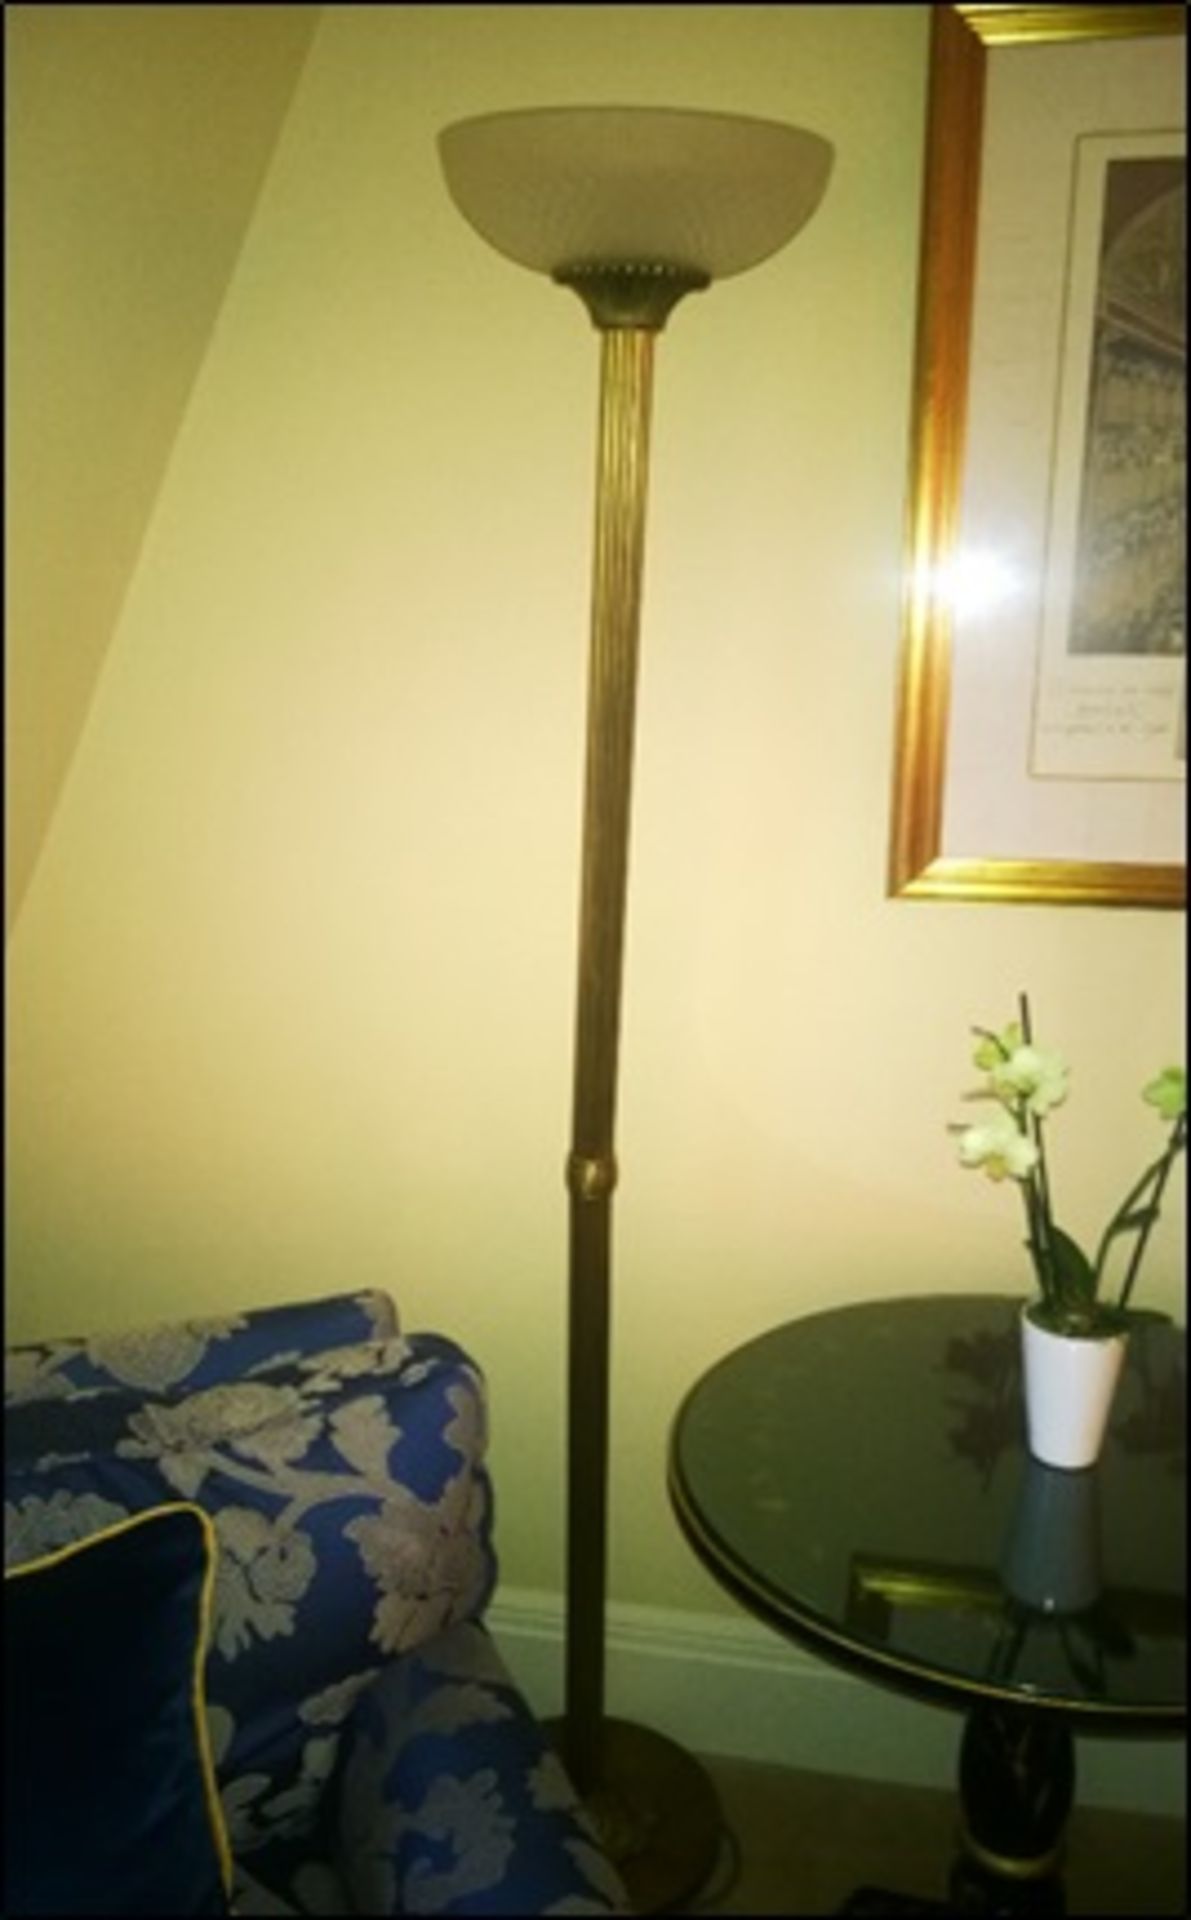 A brass floor standing uplighter lamp with shade Room203Lift out charge 5